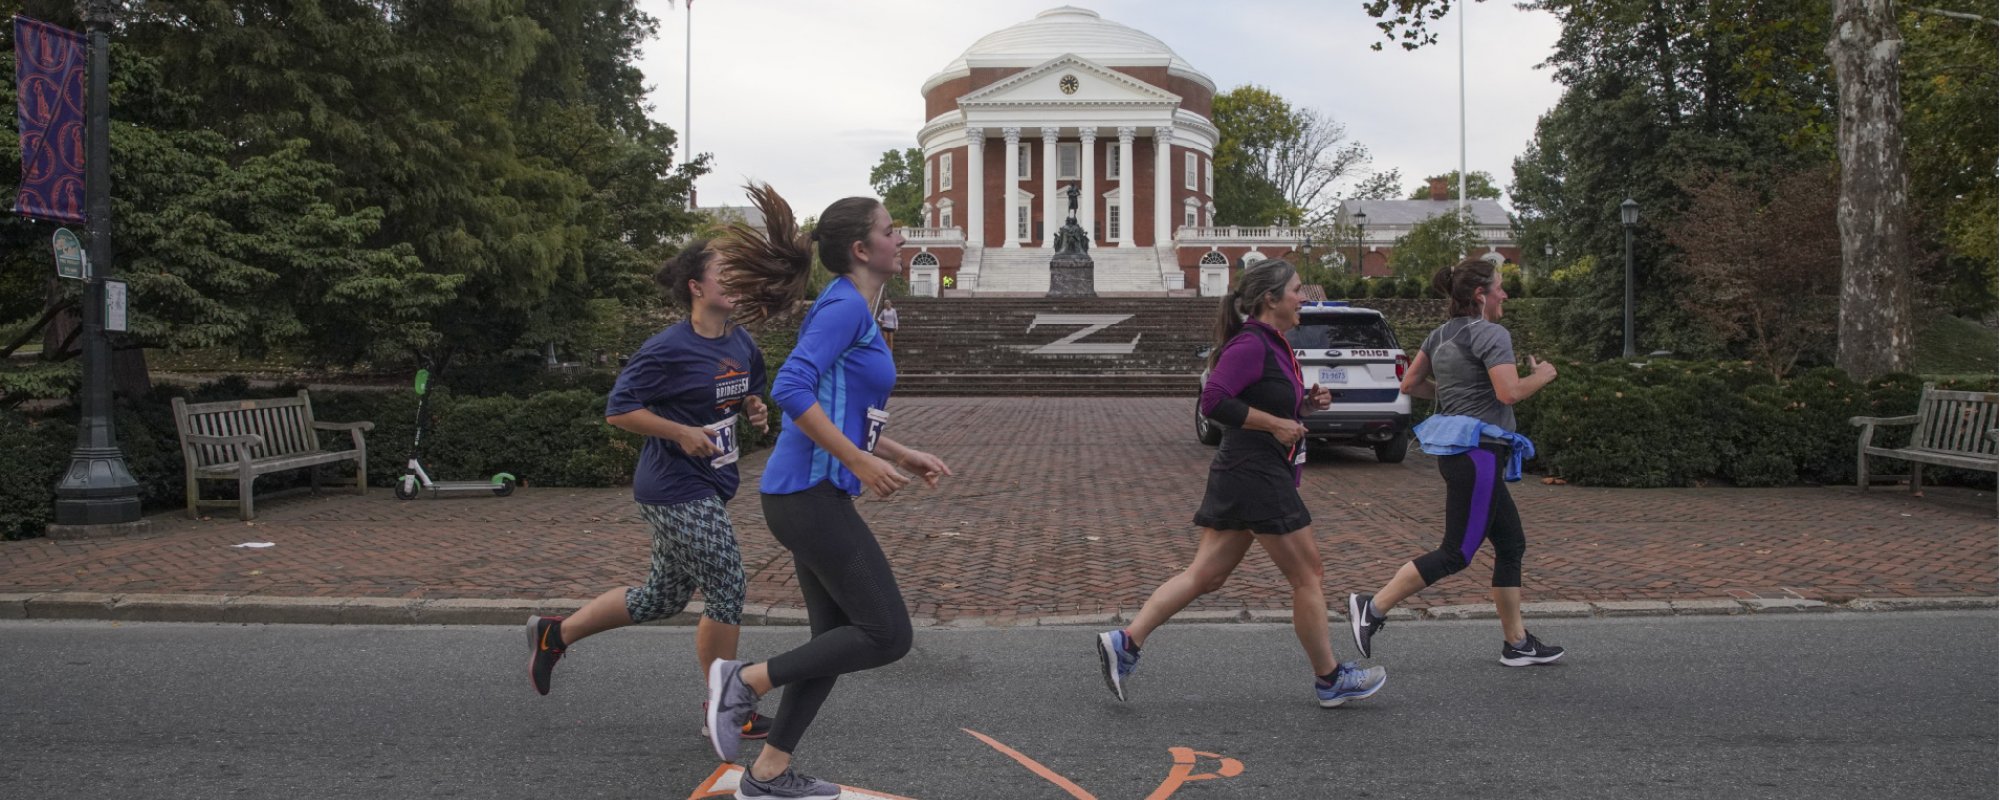 Students running in front of the Rotunda